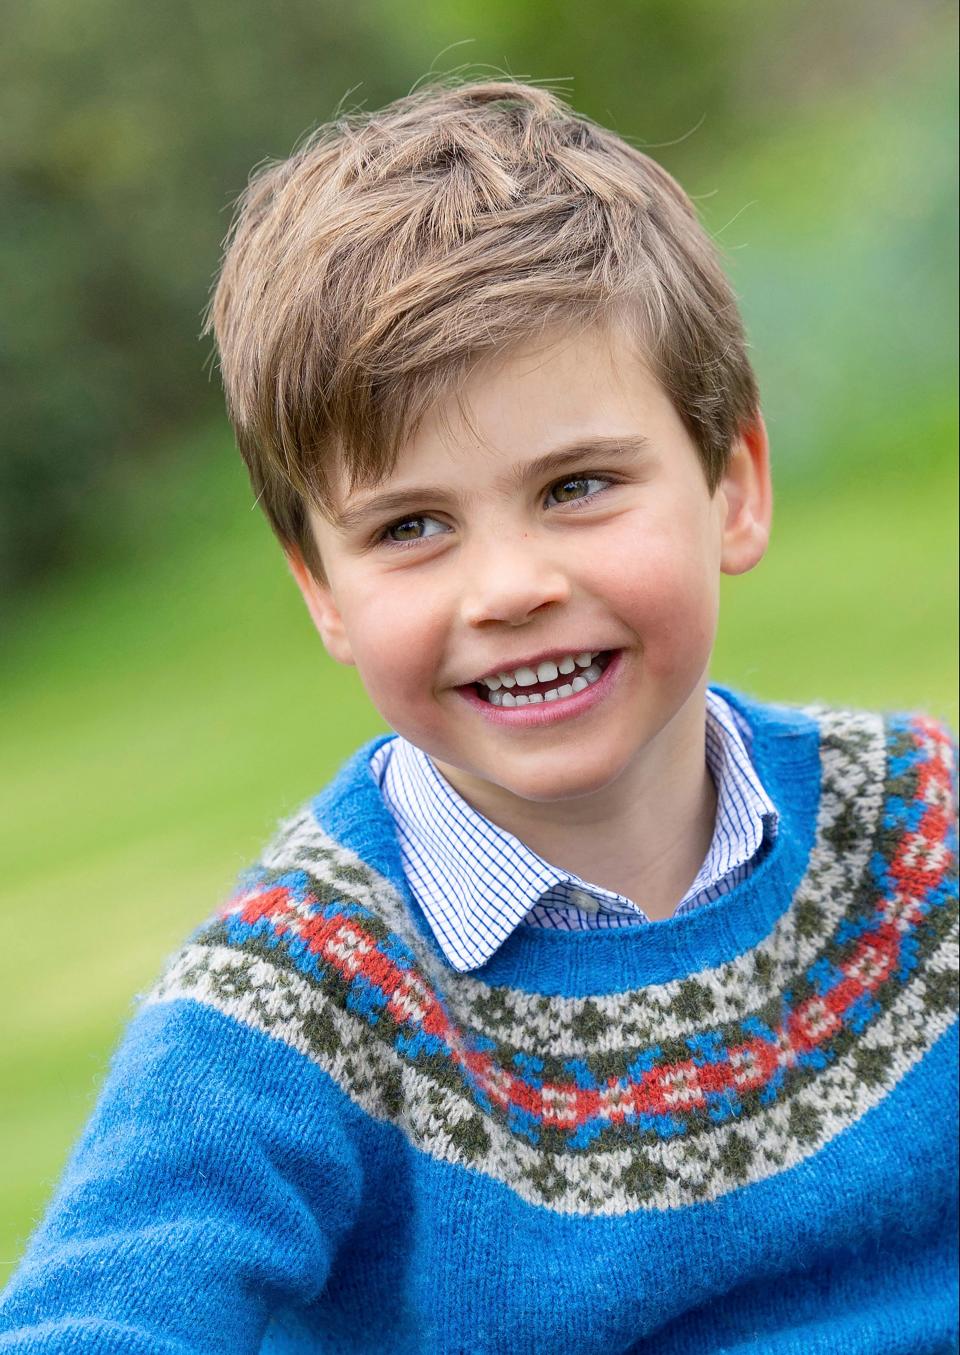 Prince Louis smiles for his 5th birthday portrait session.